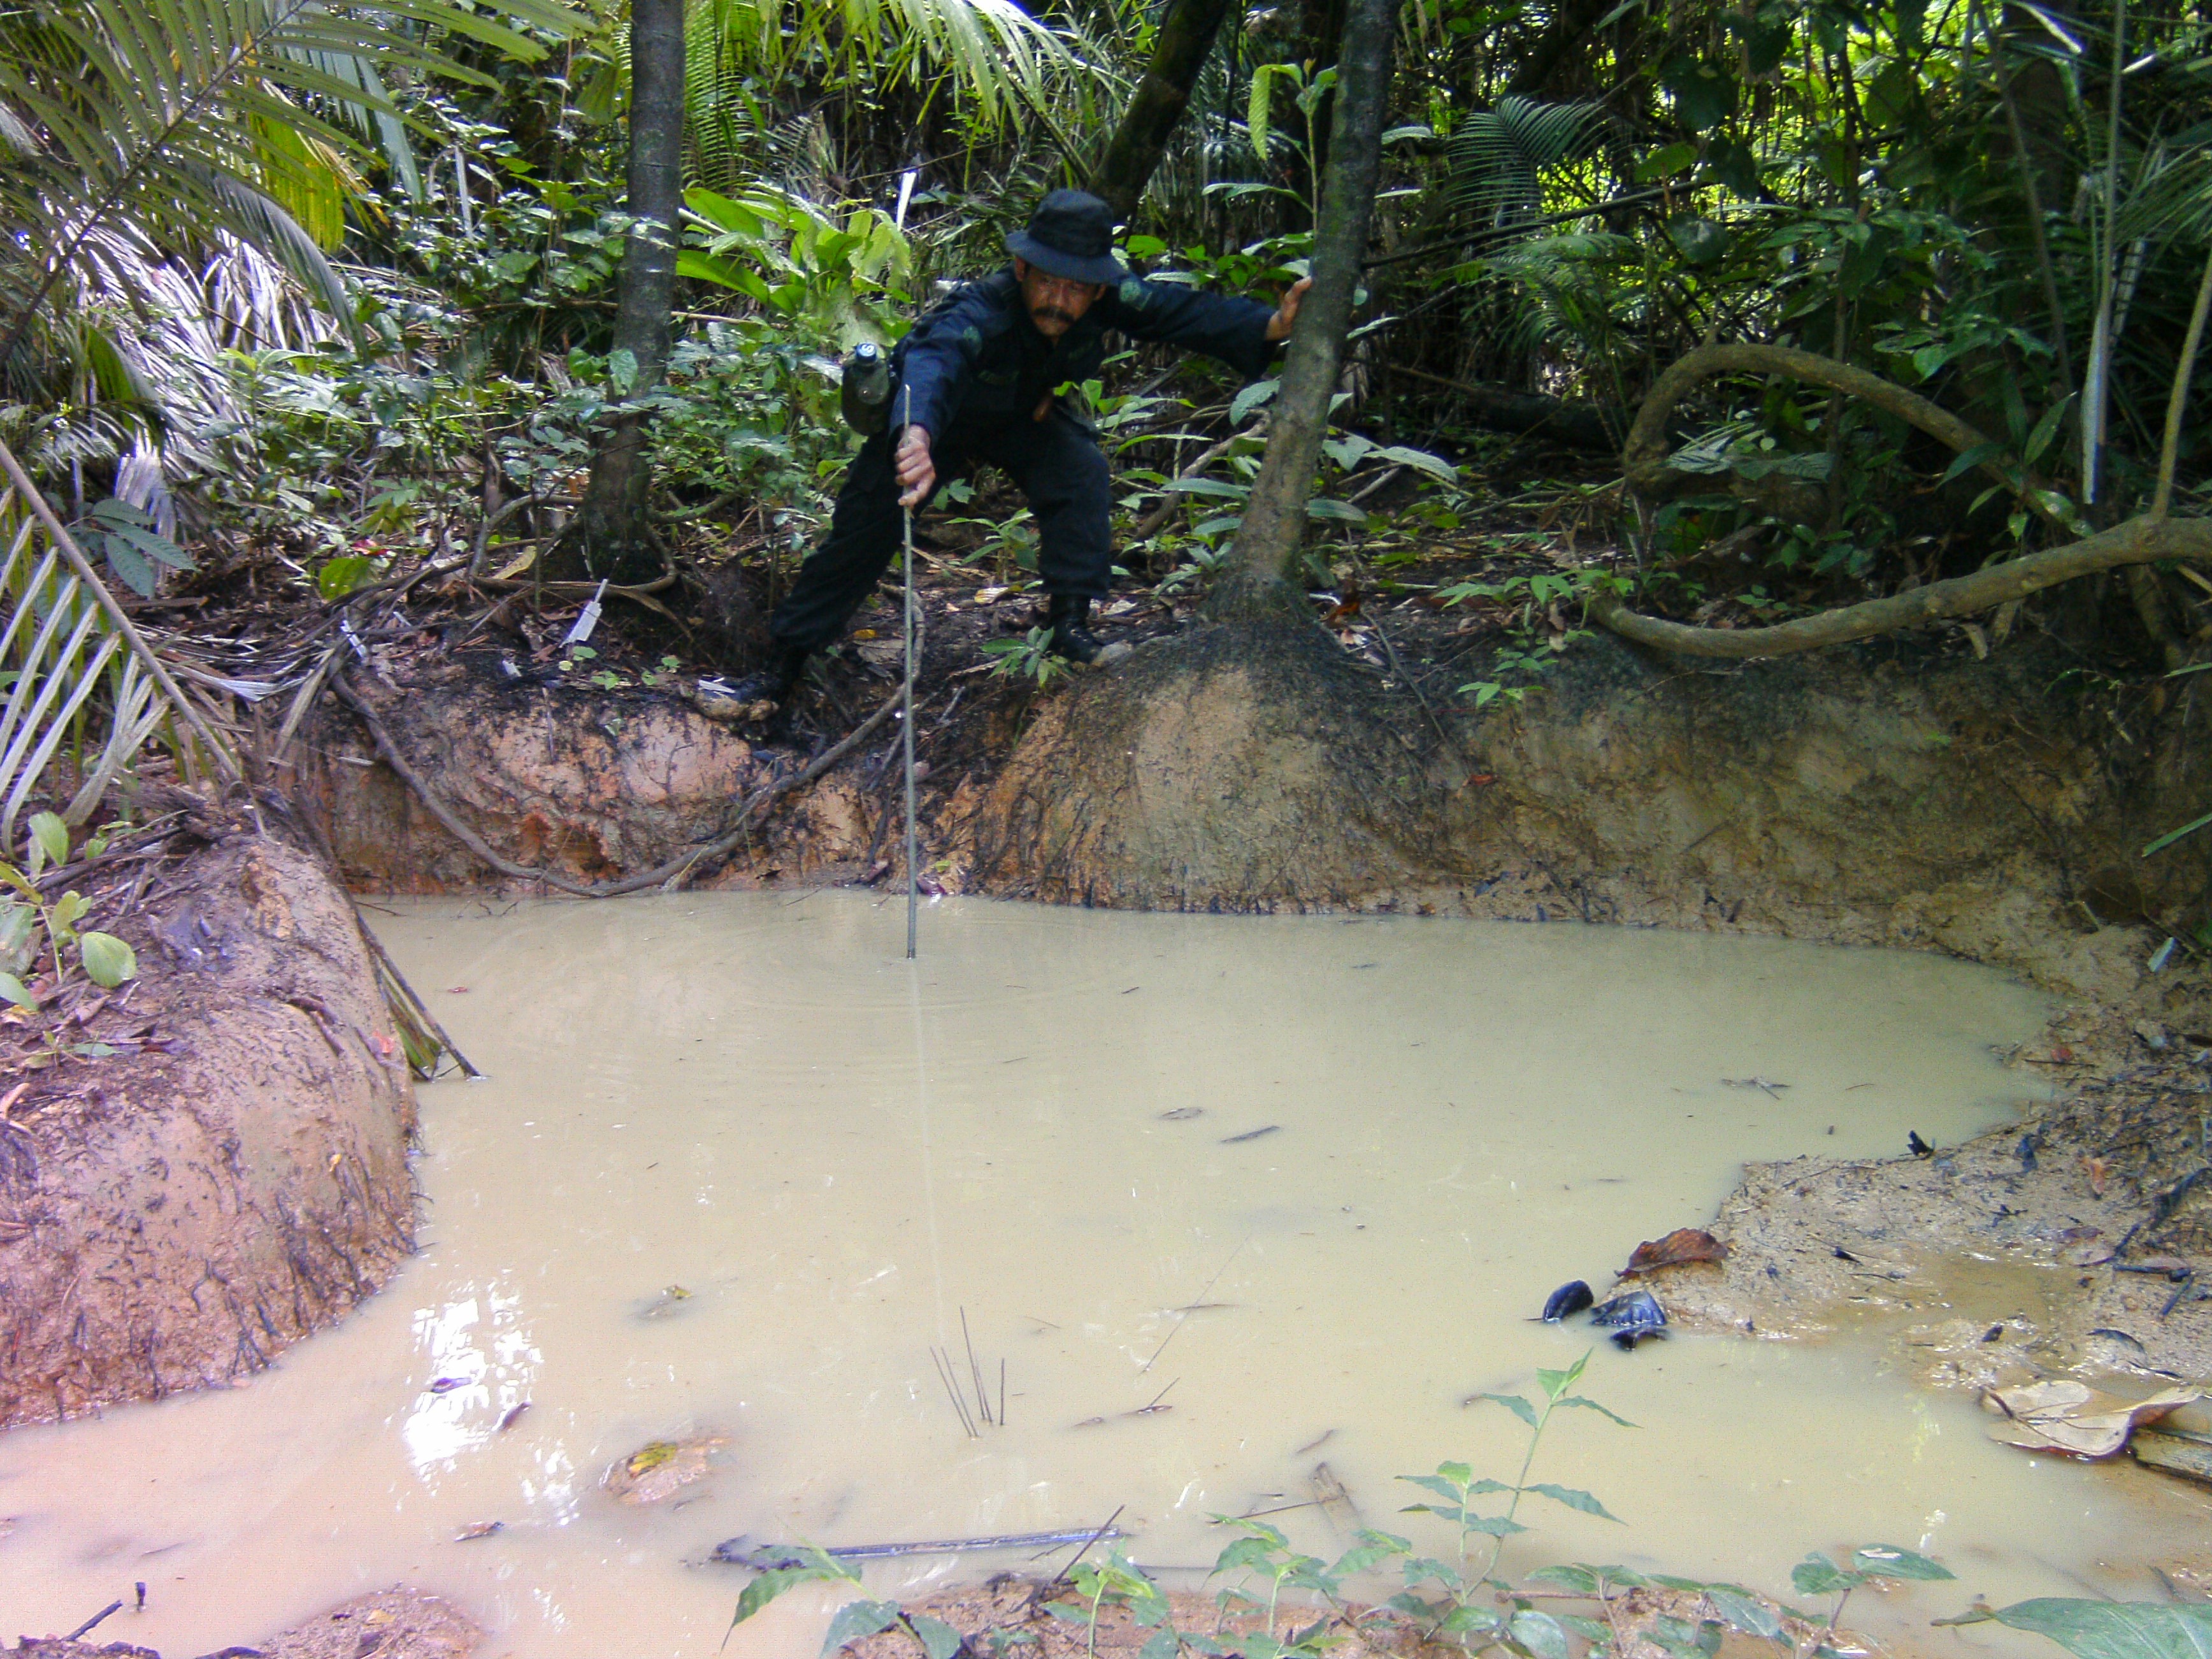 Sorhim measures the depth of a rhino wallow in Ujung Kulon National Park